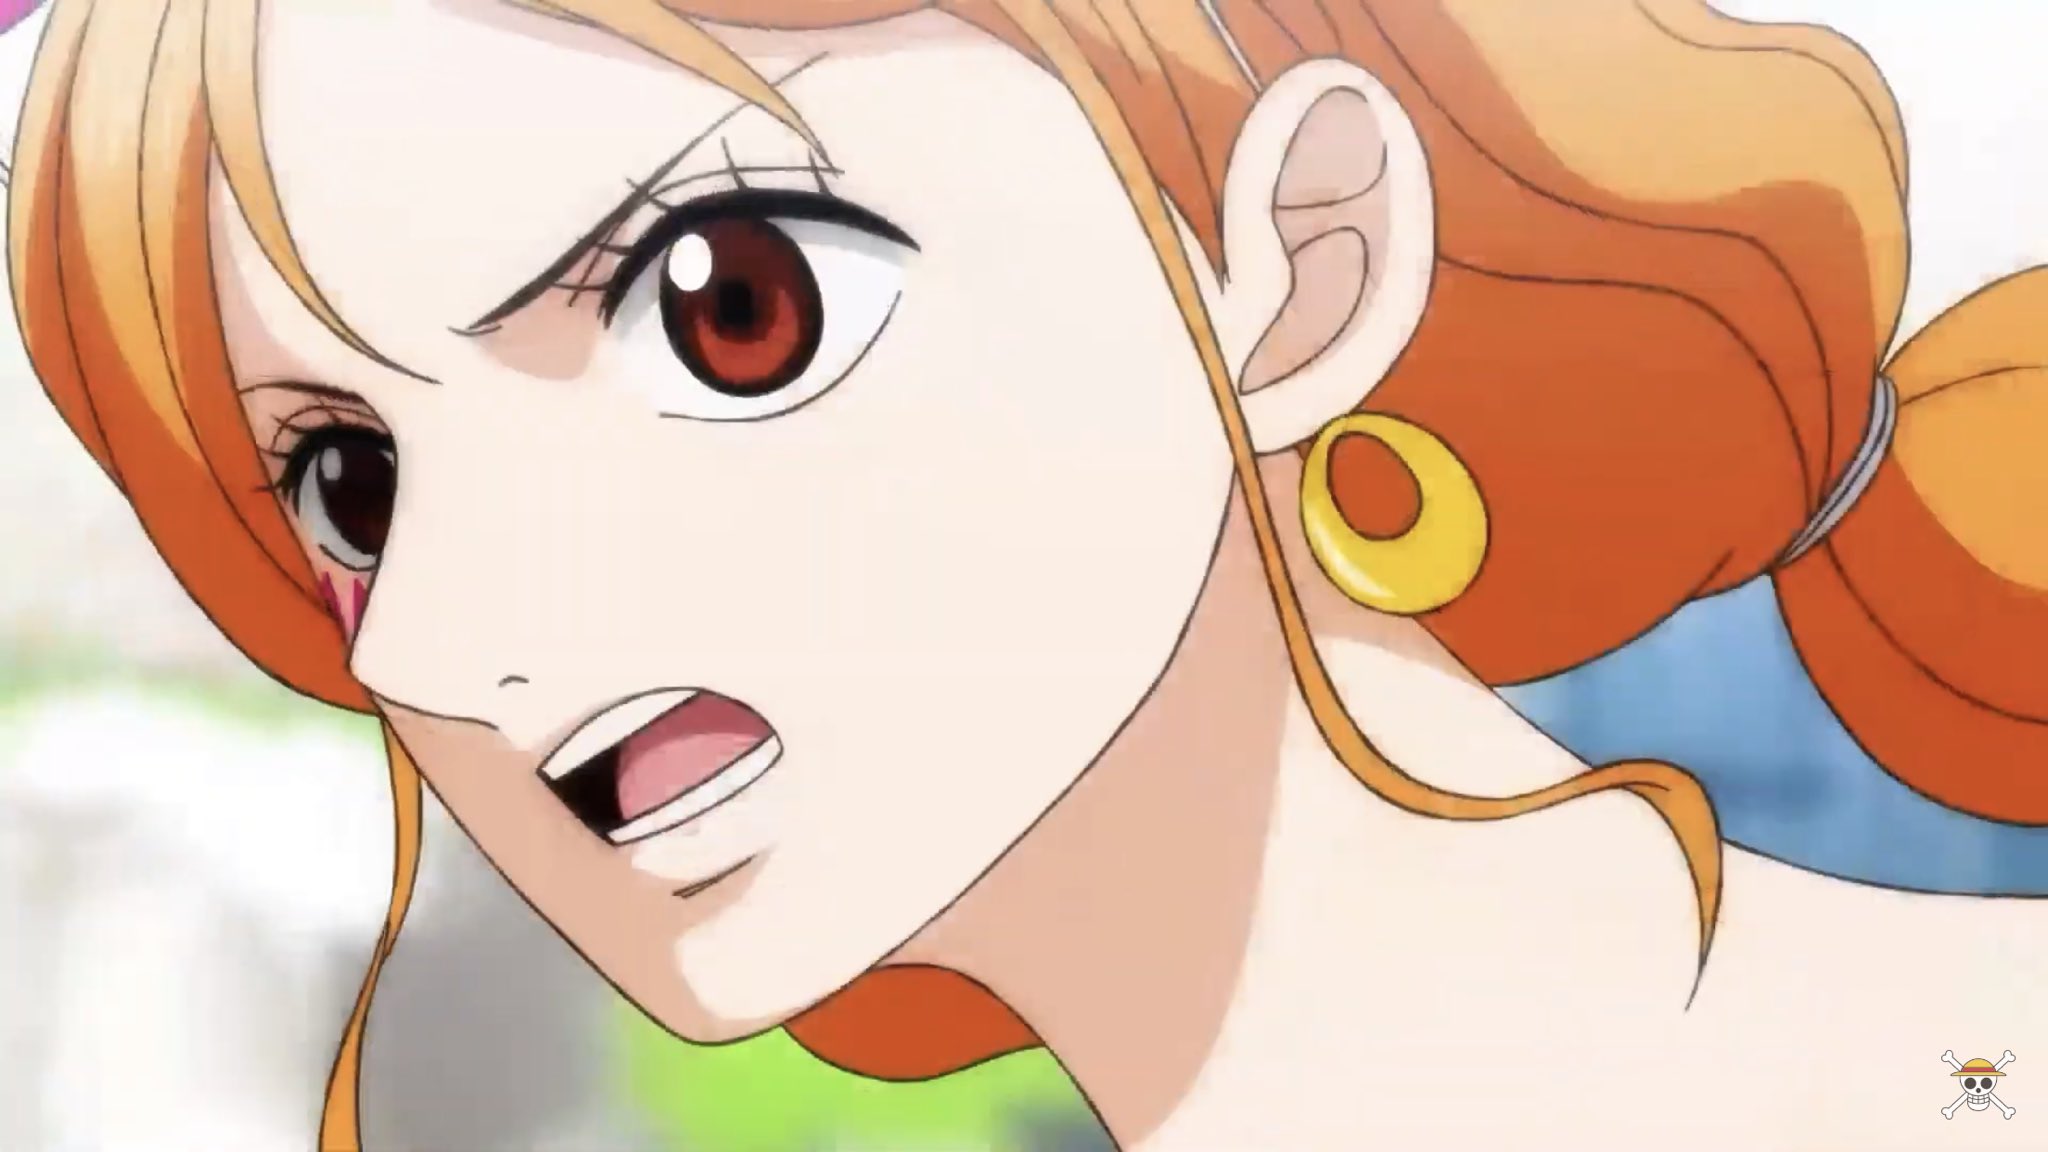 What is NAMI's eye color?